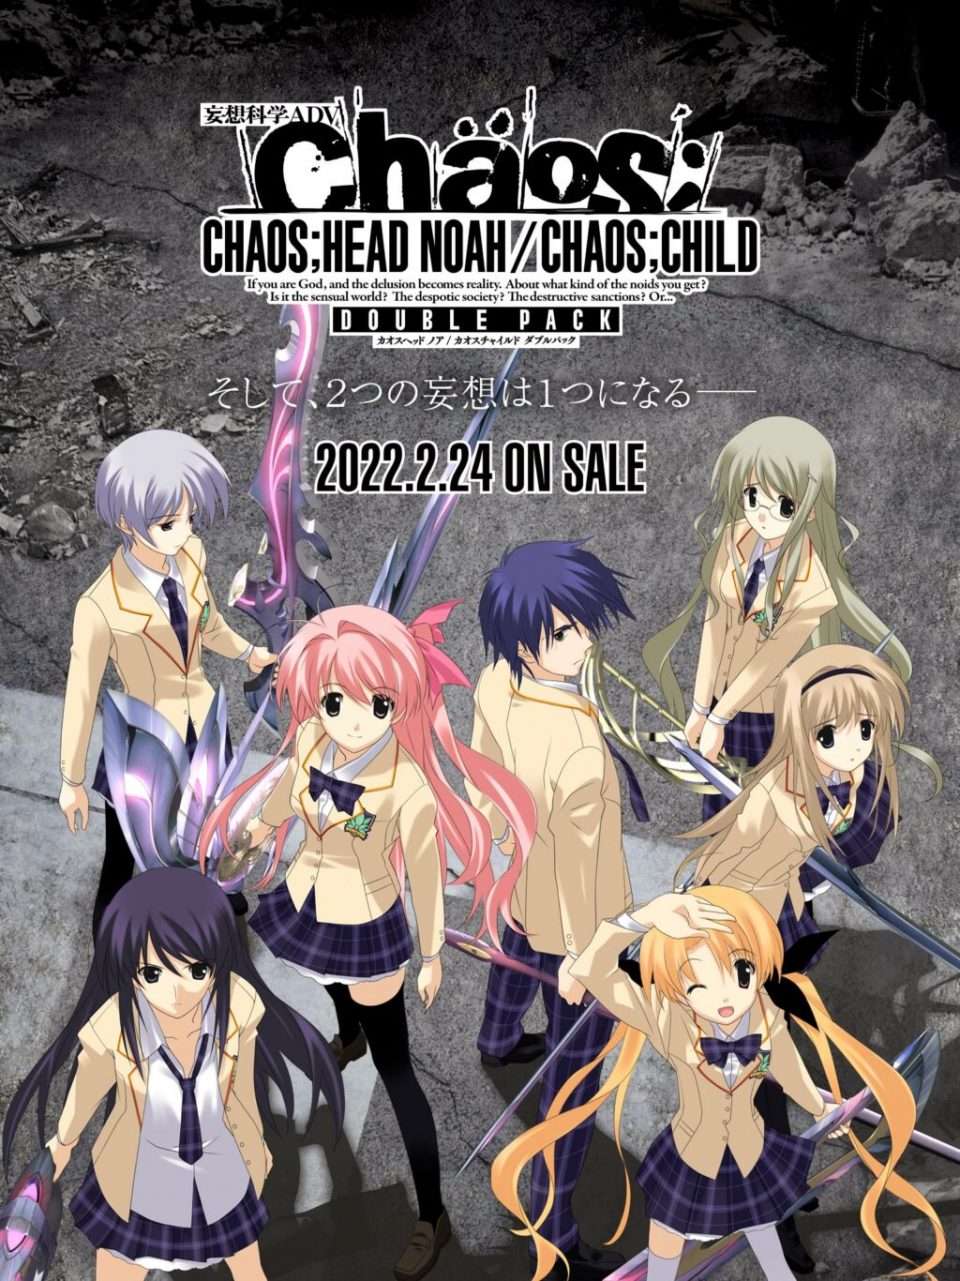 Chaos;Head Noah / Chaos;Child Double Pack annunciato per Switch 1